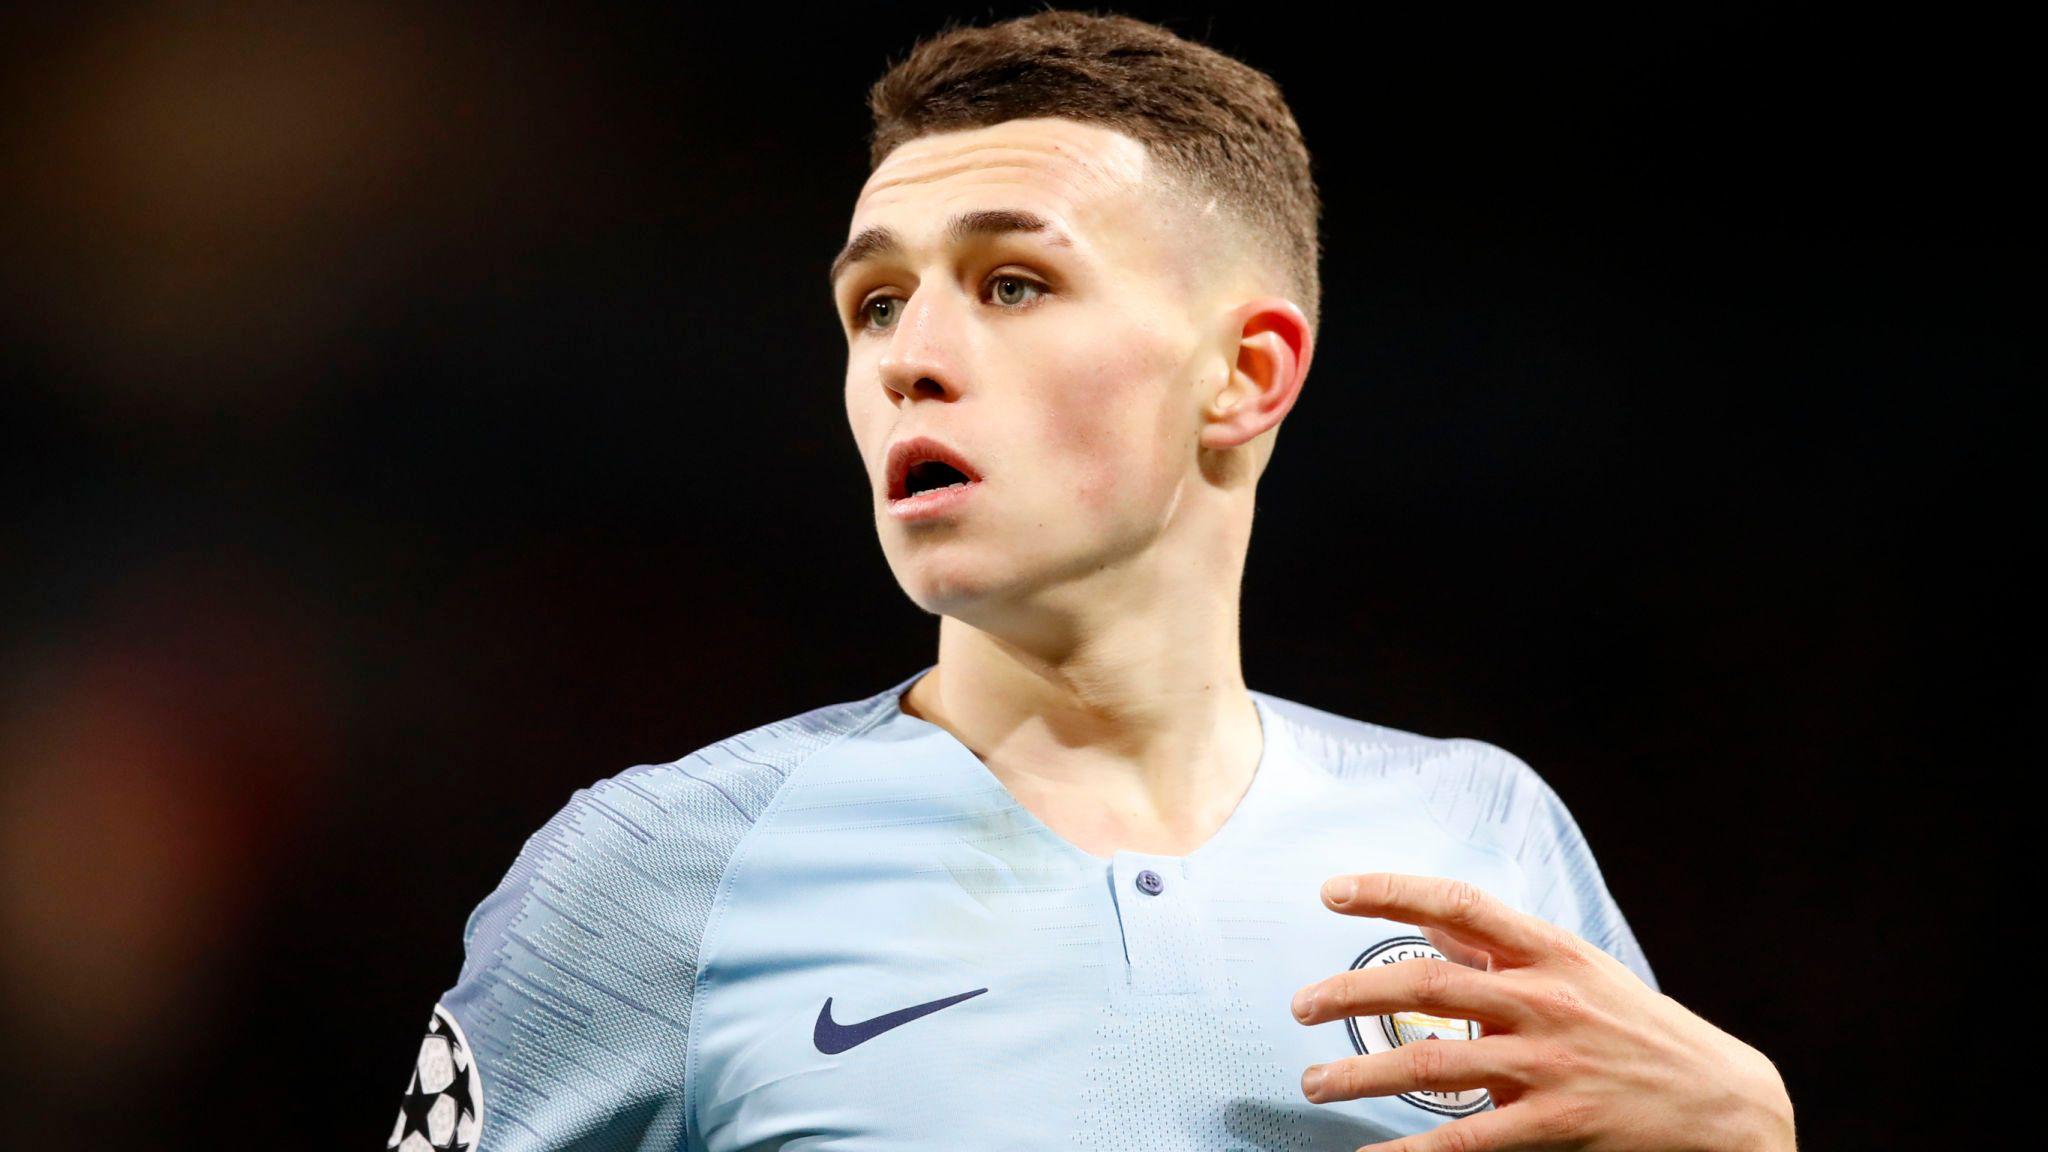 Man City perfect place for Phil Foden, says Craig Bellamy.